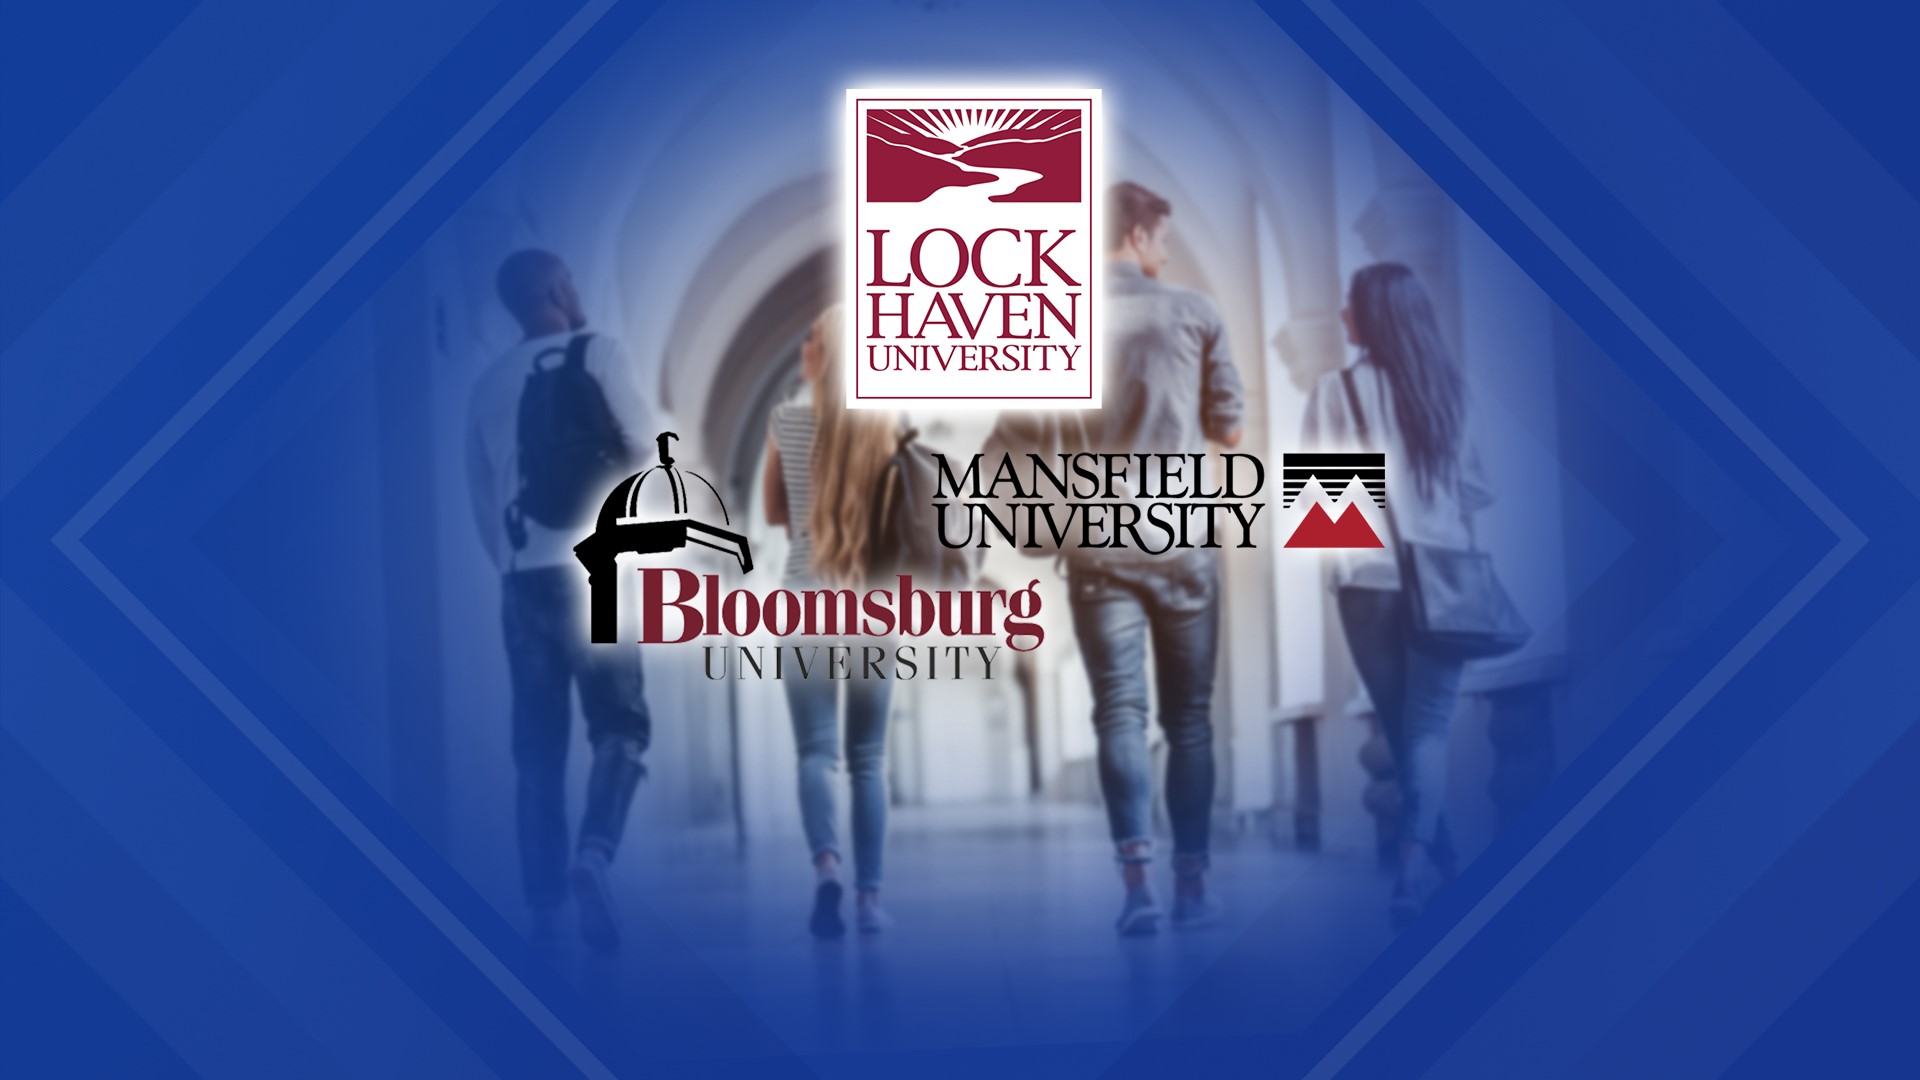 The state system of higher education voted to merge Bloomsburg, Lock Haven, and Mansfield.